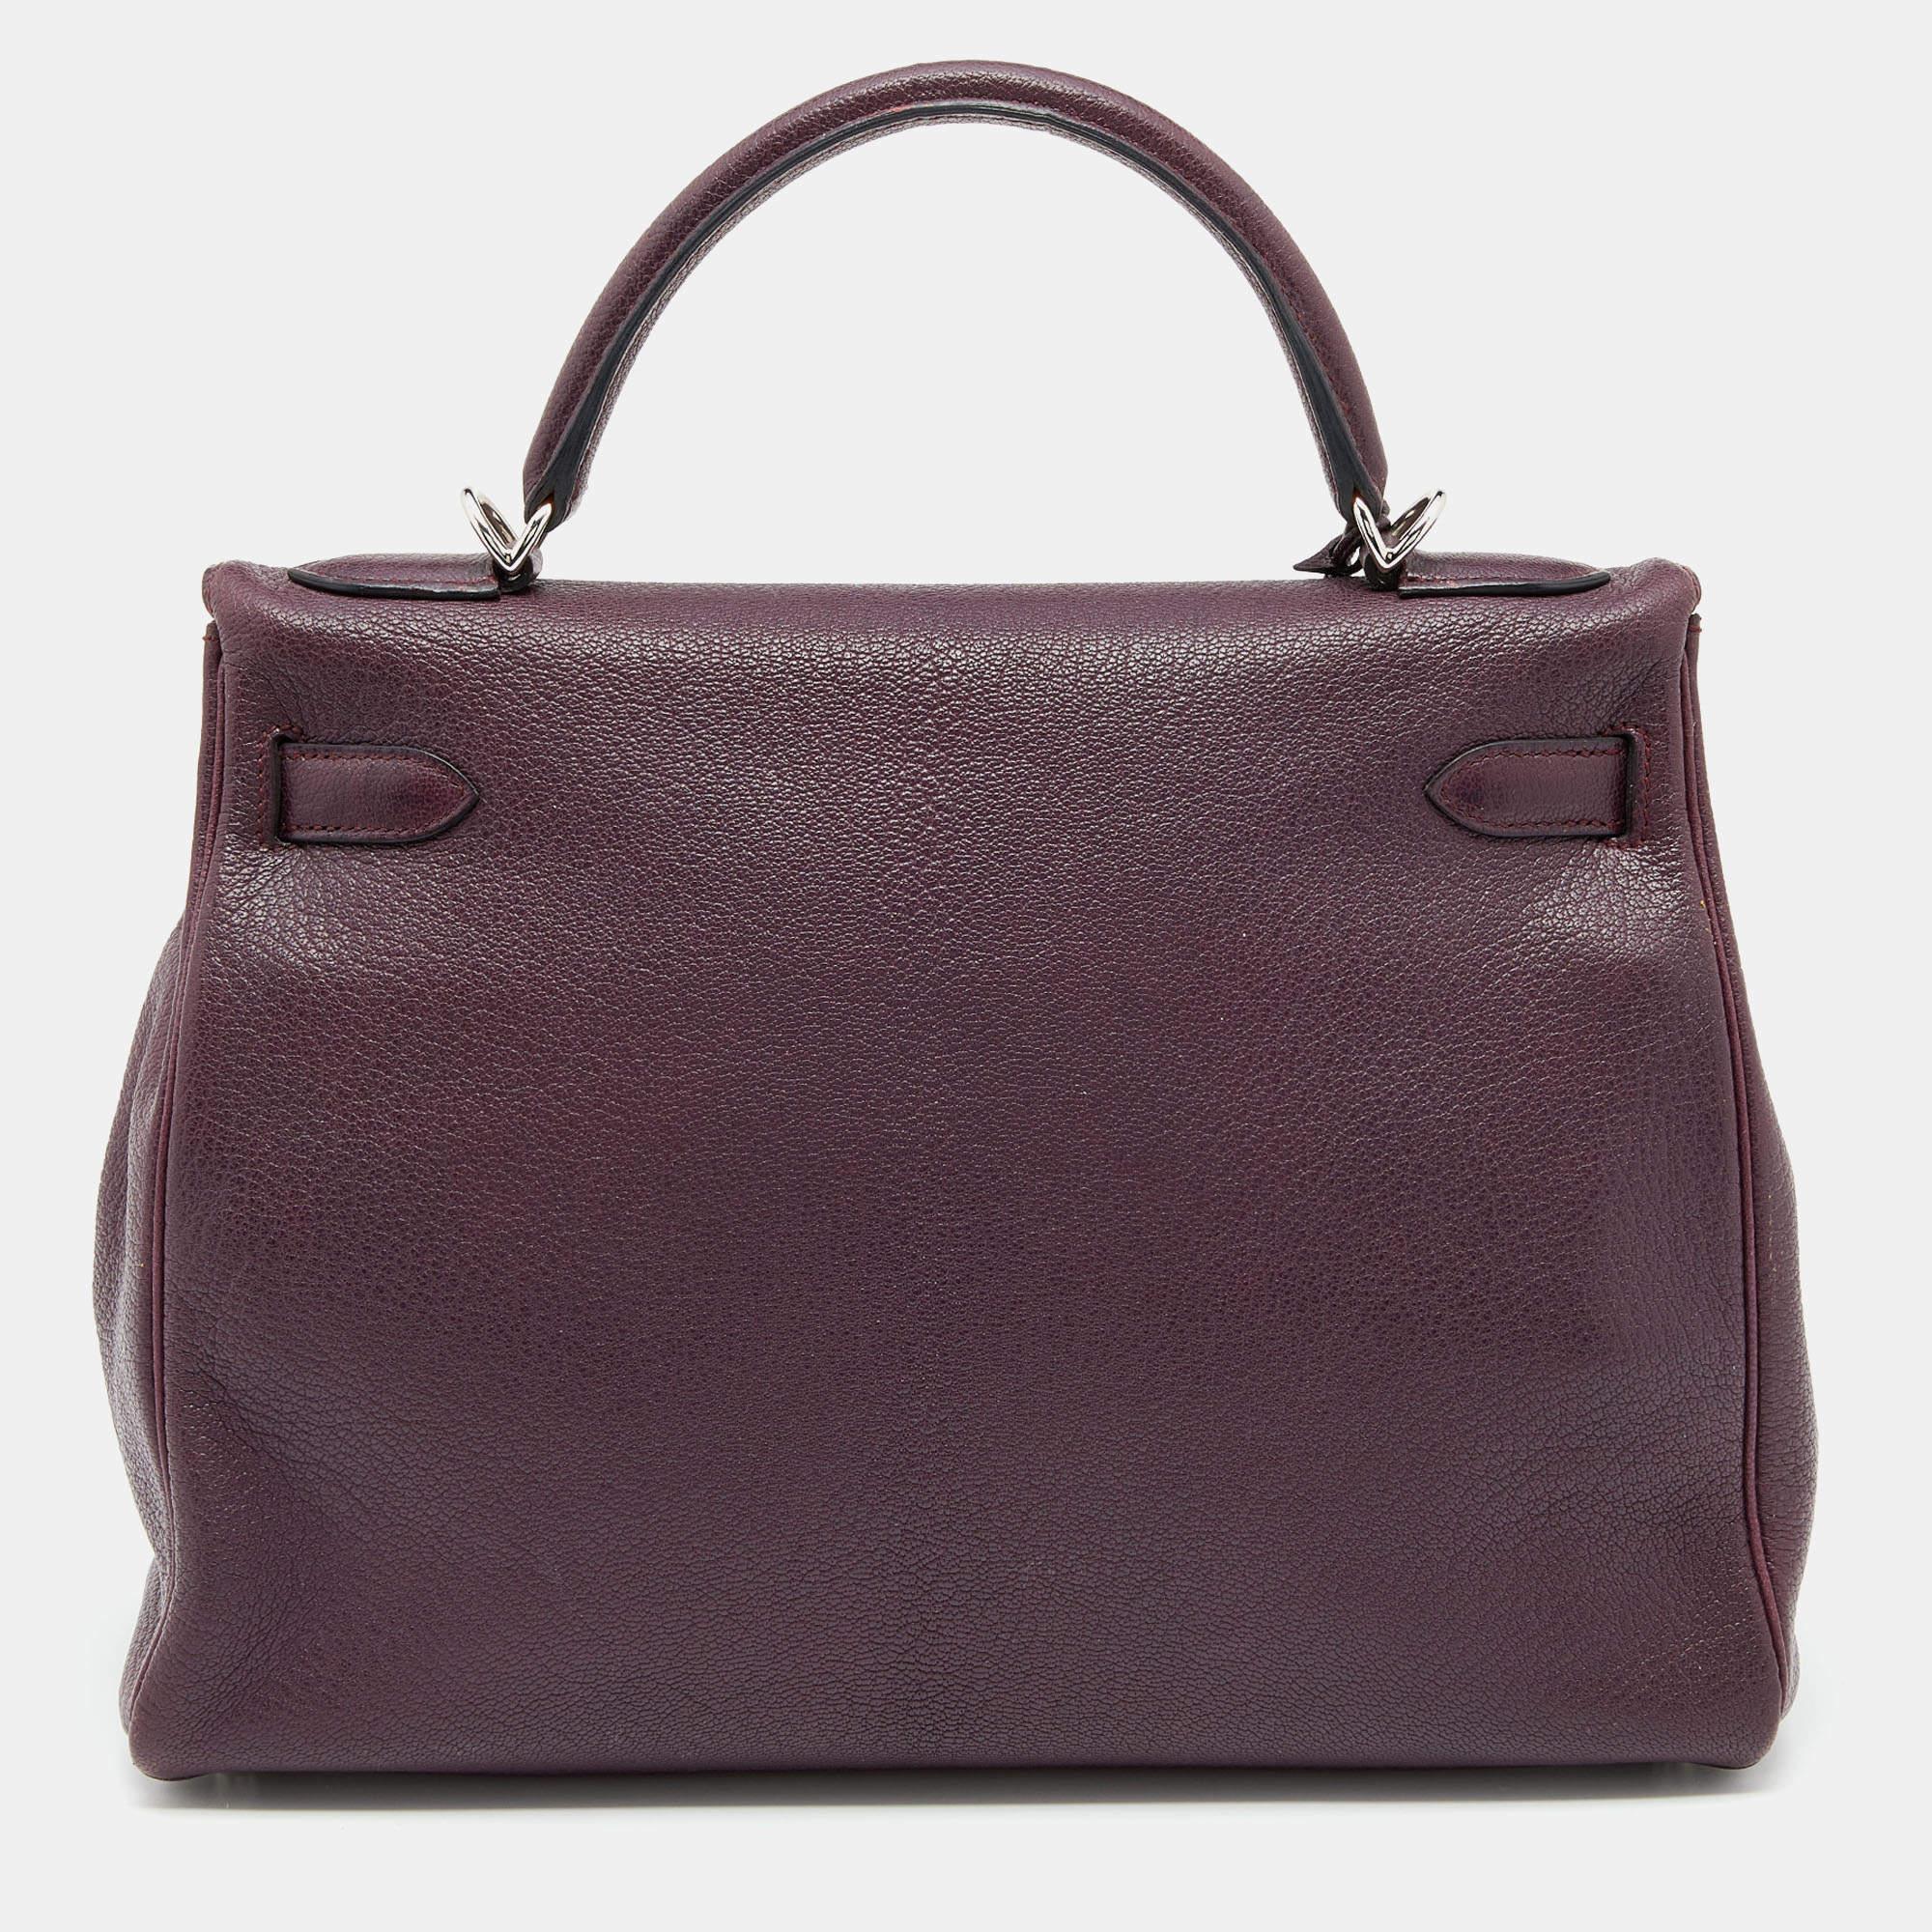 The Hermes Kelly is beautiful as it is carefully hand-stitched to perfection. This Violet Kelly Retourne 32 is crafted from Chevre de Coromandel leather and has palladium-plated hardware. The bag comes with a turn-lock closure, a single top rolled